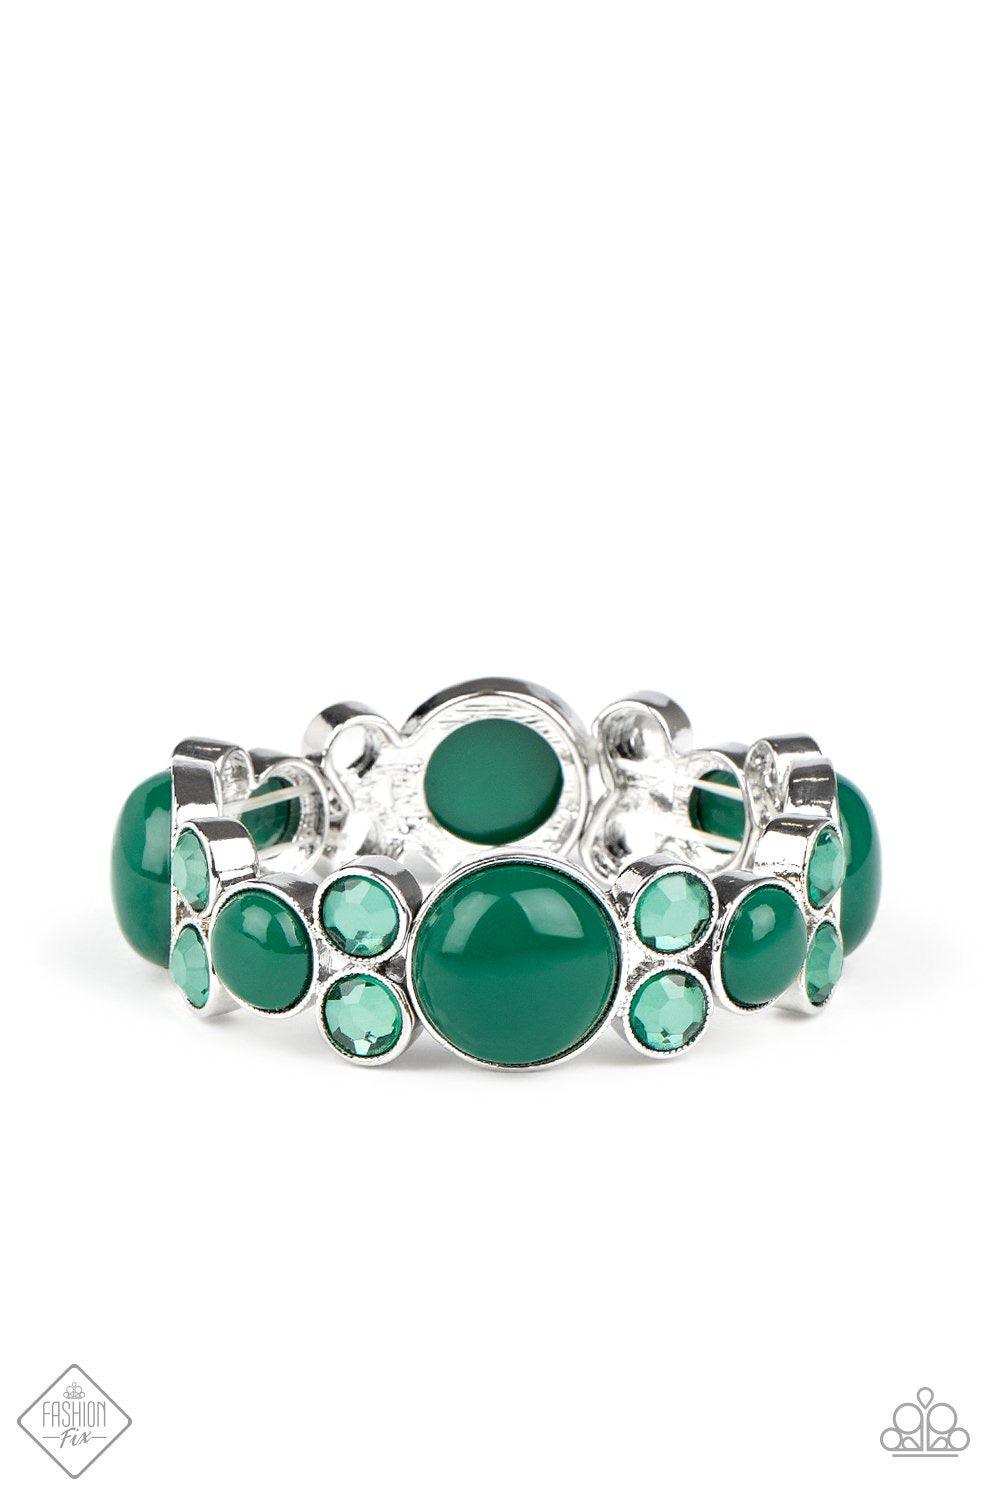 Paparazzi Accessories Celestial Escape - Green Infused with pairs of Ultramarine Green rhinestones, mismatched Ultramarine Green beaded silver frames are delicately threaded along stretchy bands around the wrist for a whimsical pop of color. Sold as one i